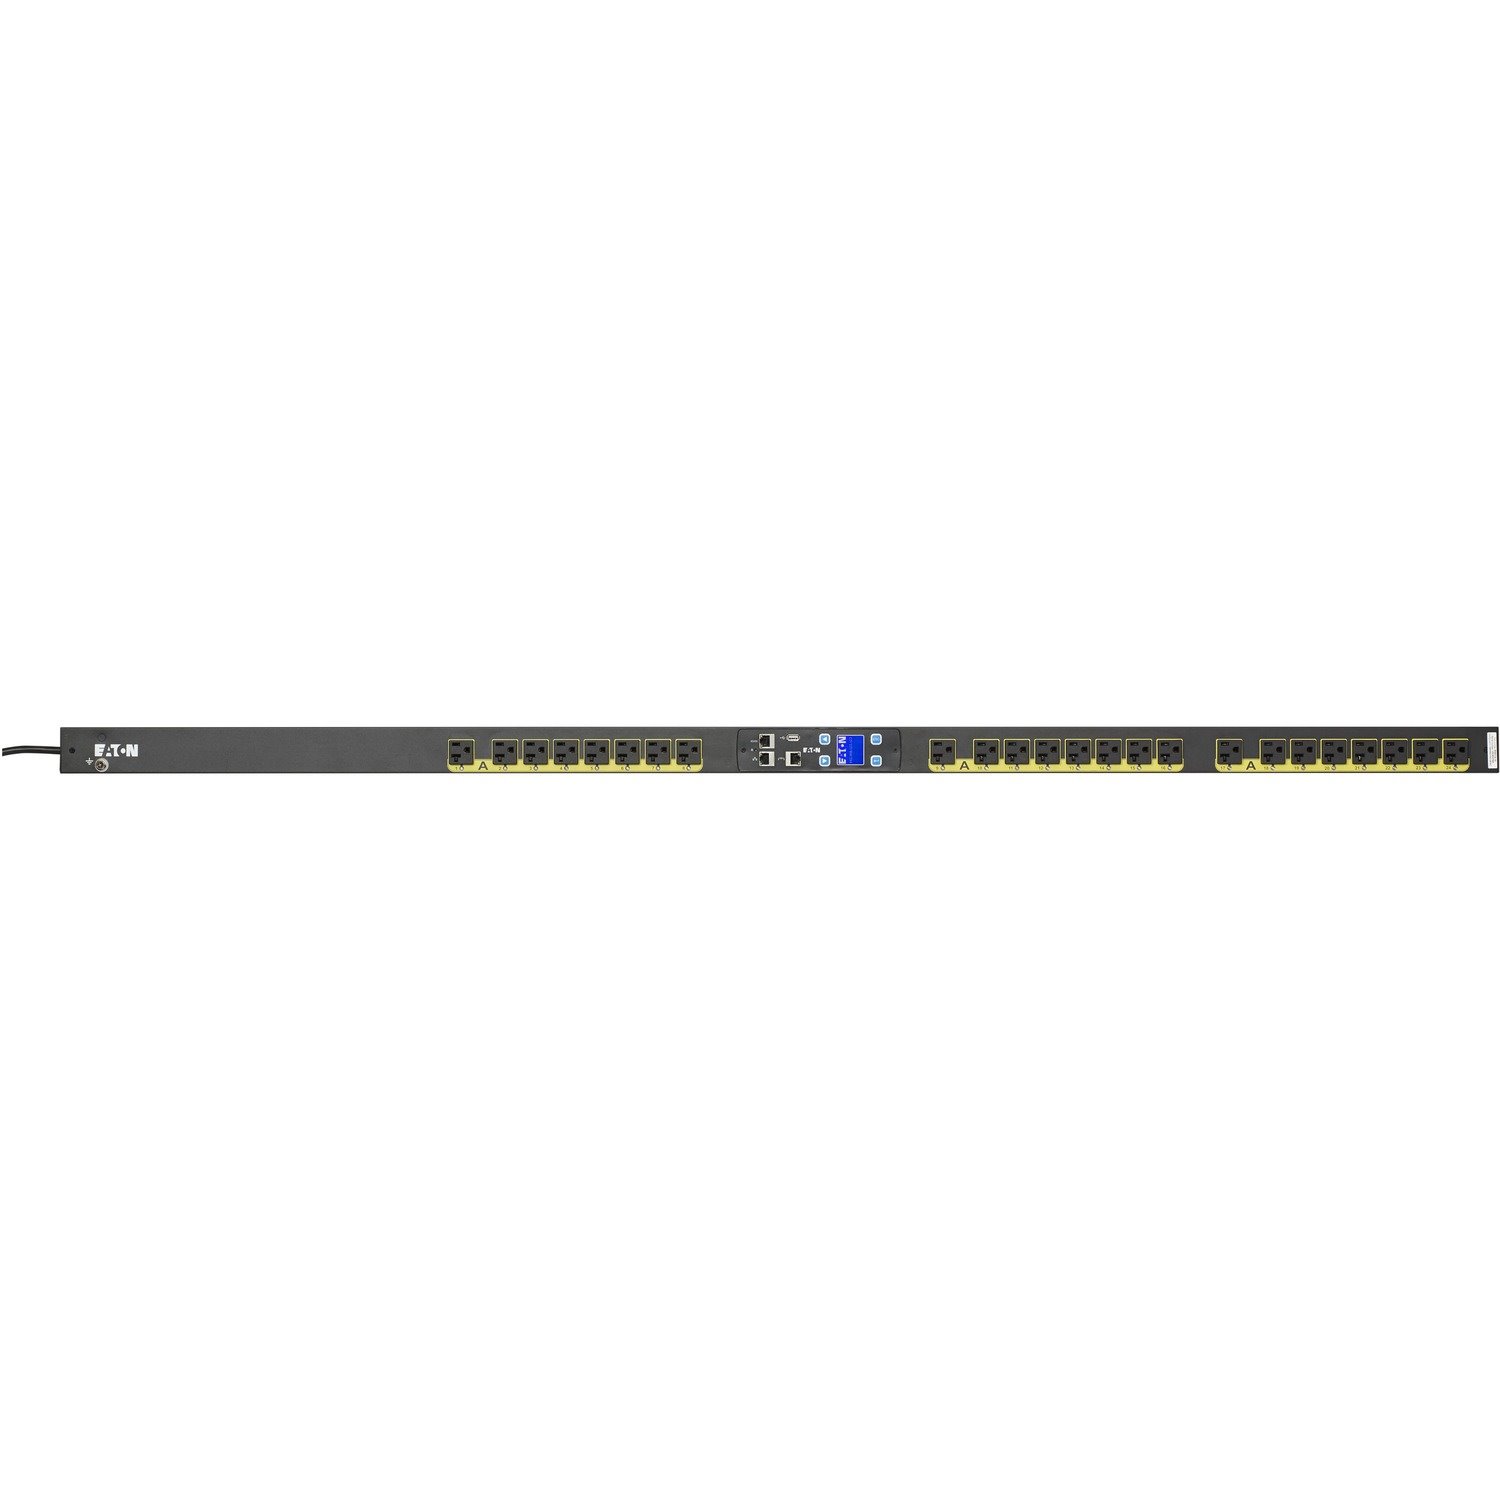 Eaton Managed rack PDU, 0U, 5-20P, L5-20P input, 1.92 kW max, 120V, 16A, 10 ft cord, Black, Single-phase, Outlets: (24) 5-20R - TAA compliant